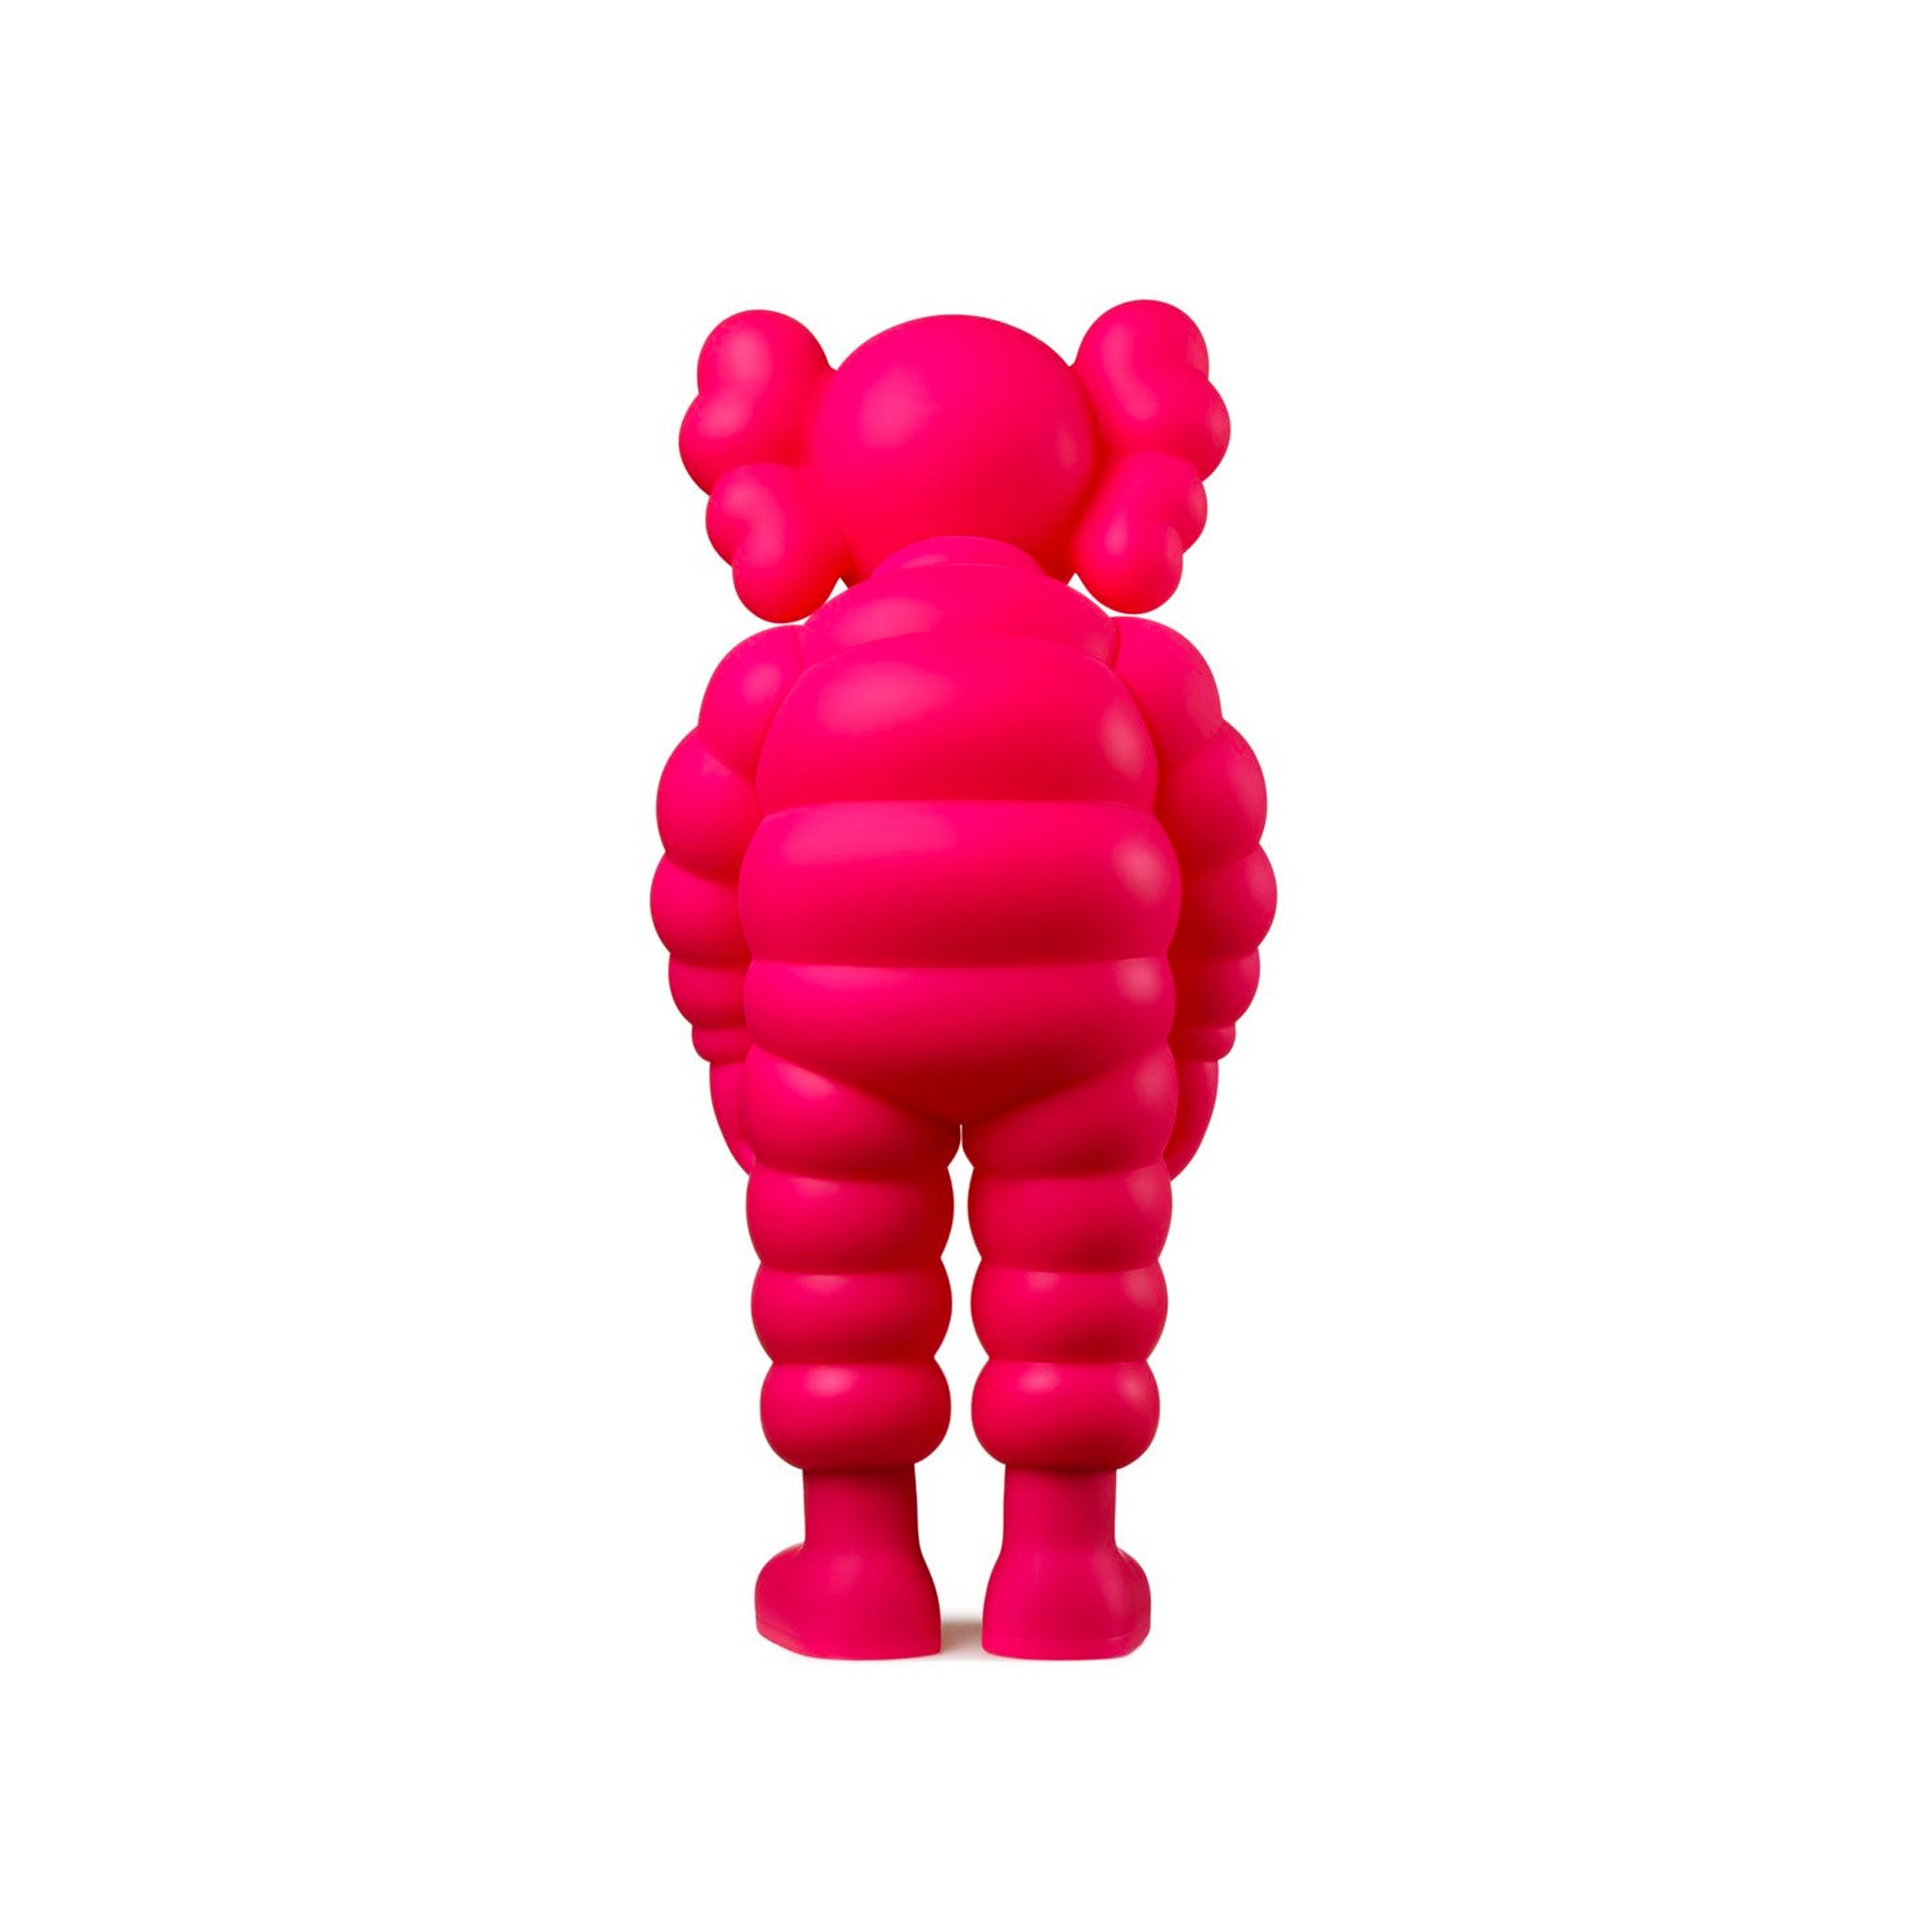 KAWS WHAT PARTY OPEN EDITION ROSA